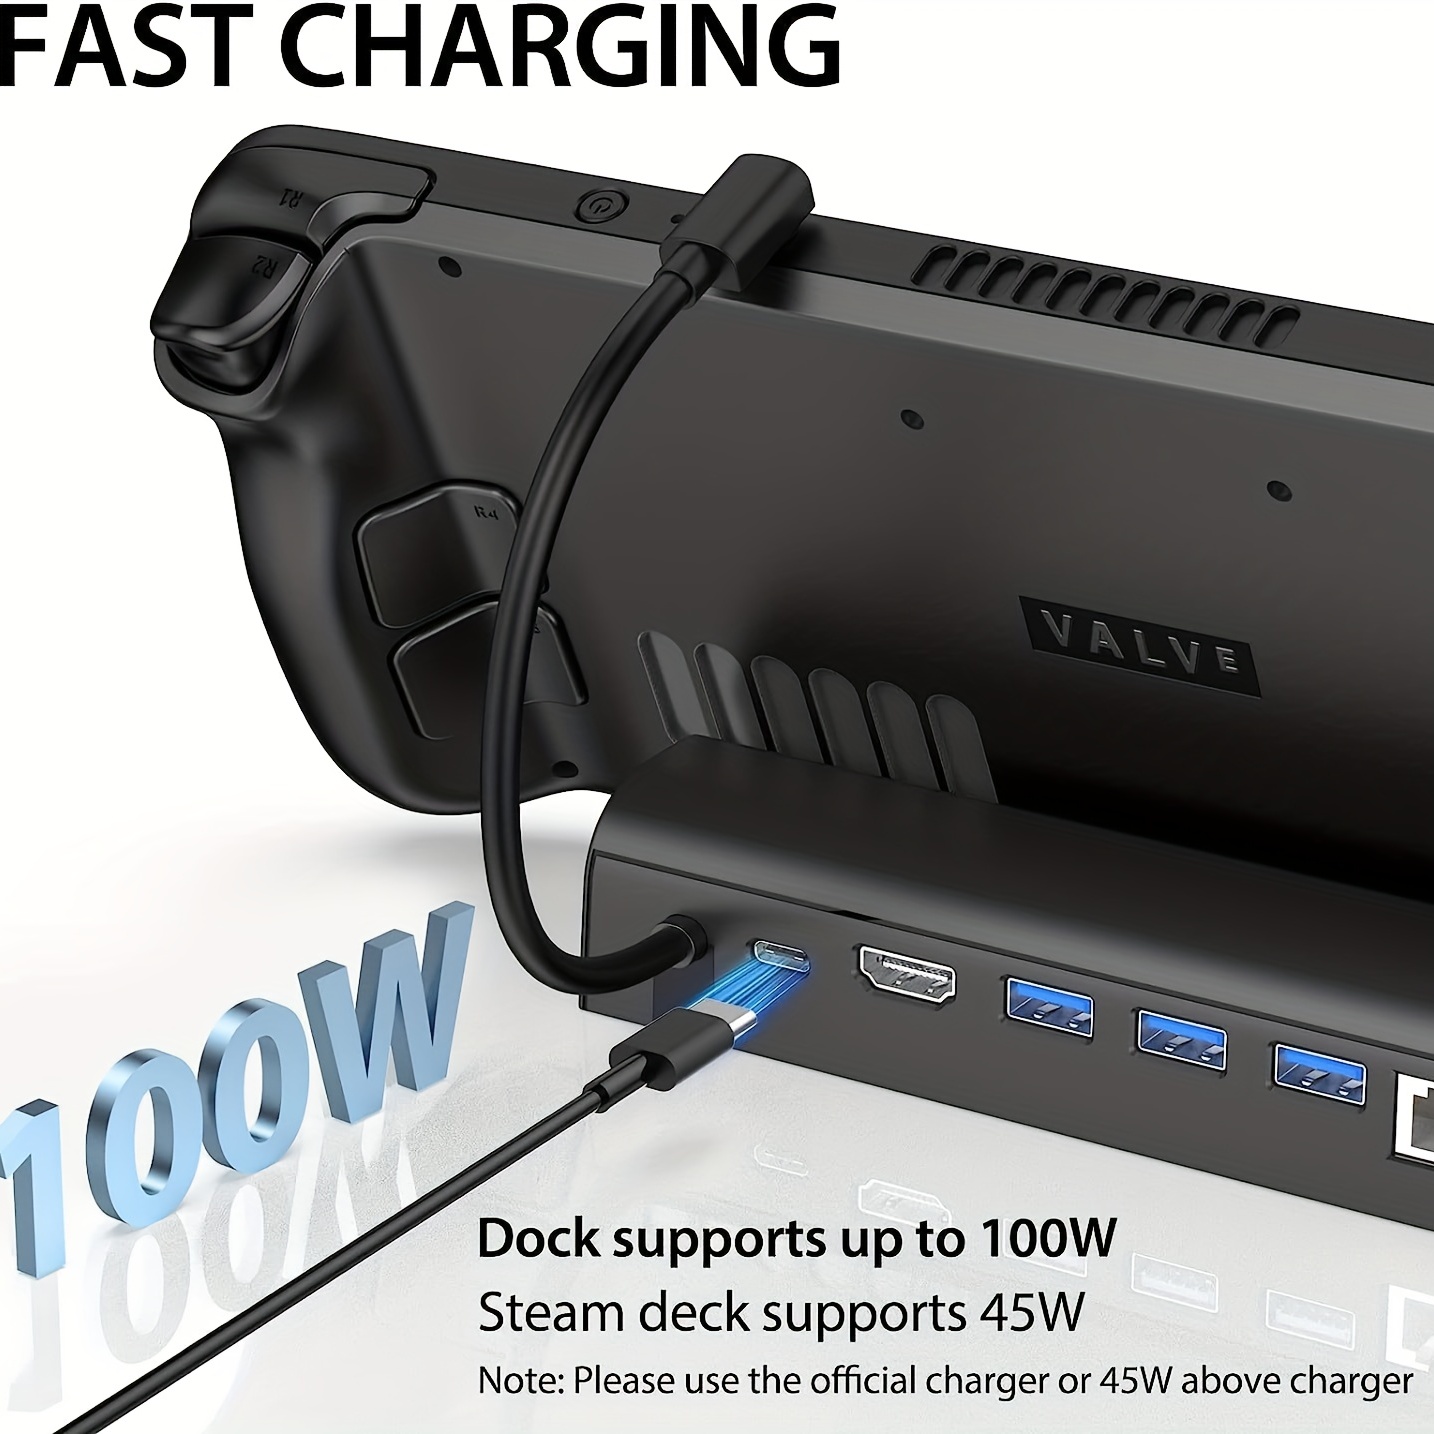  Docking Station for Steam Deck/ROG Ally,6 in 1 Steam Deck Dock  with HDMI 2.0 4K@60Hz+Gigabit Ethernet+3 USB-A 3.0+Full Speed Charging  USB-C PD 3.0 Port Compatible for Valve Steam Deck Accessories Hub 